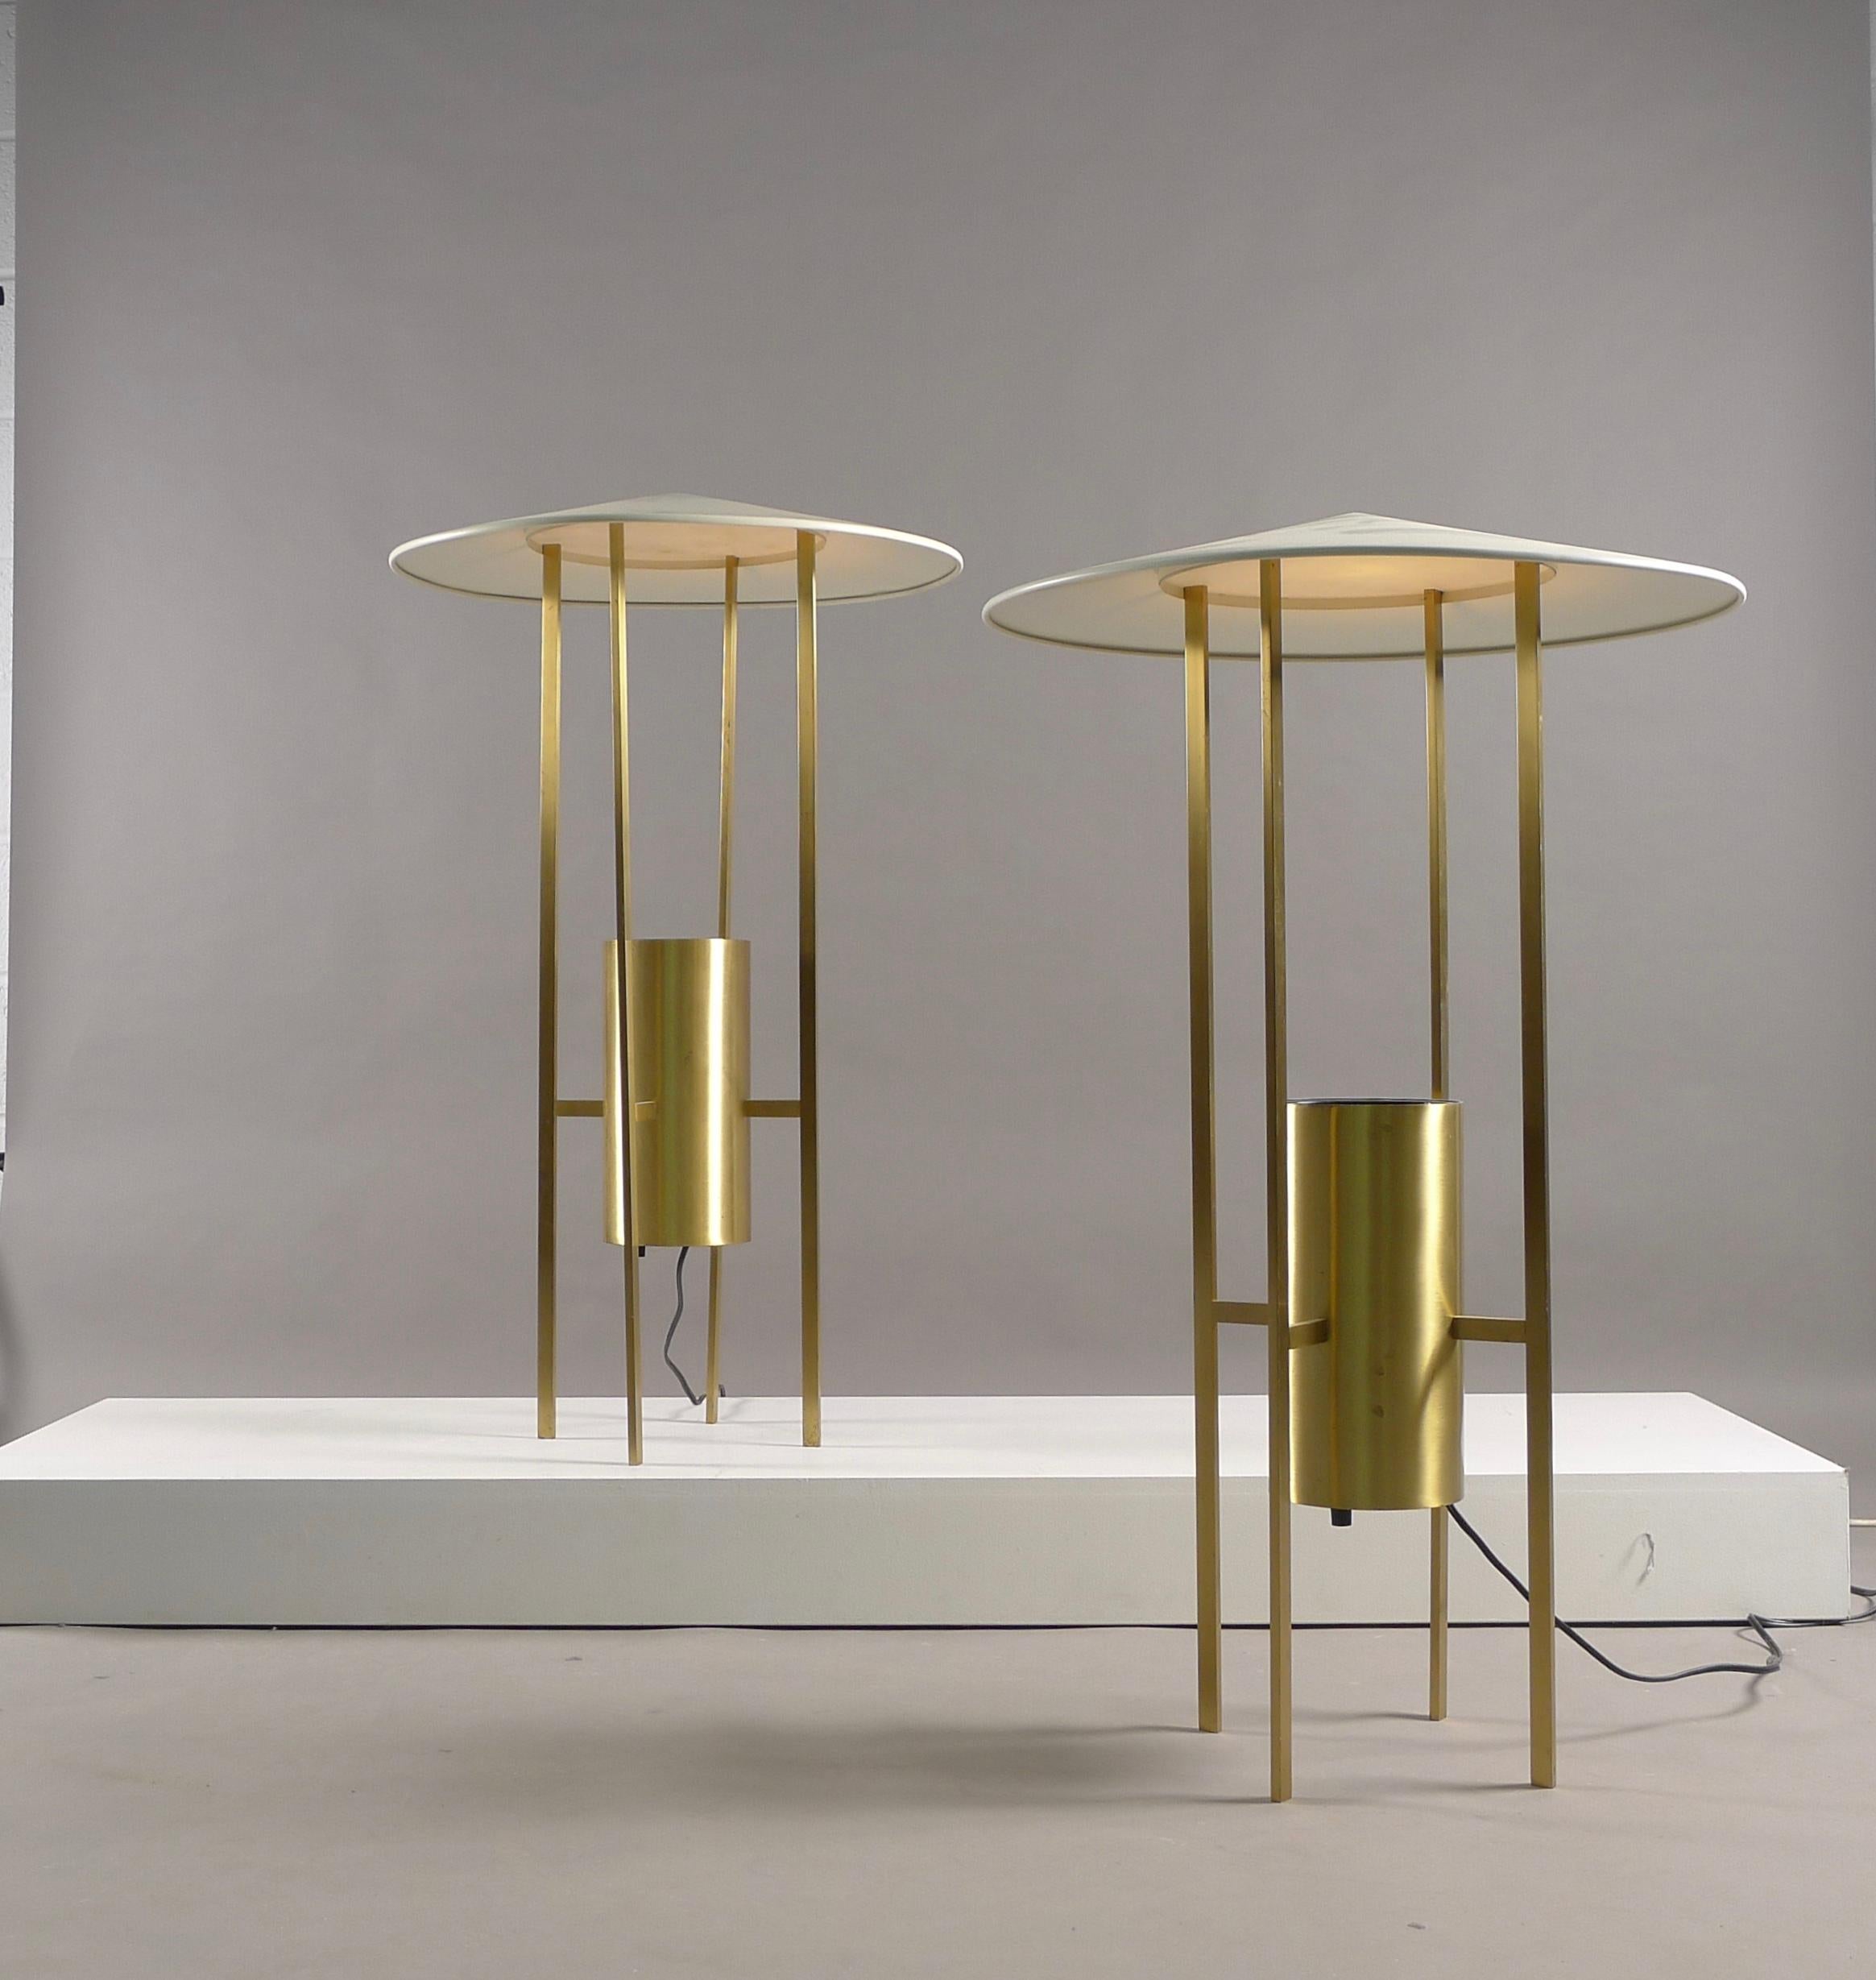 Philip Johnson and Richard Kelly for Edidson Price, designed in 1953. A pair of floor lamps of brass framework supporting enameled metal shade. Switched from beneath the light canister with a dimmable switch.
Both lamps have original labels to the